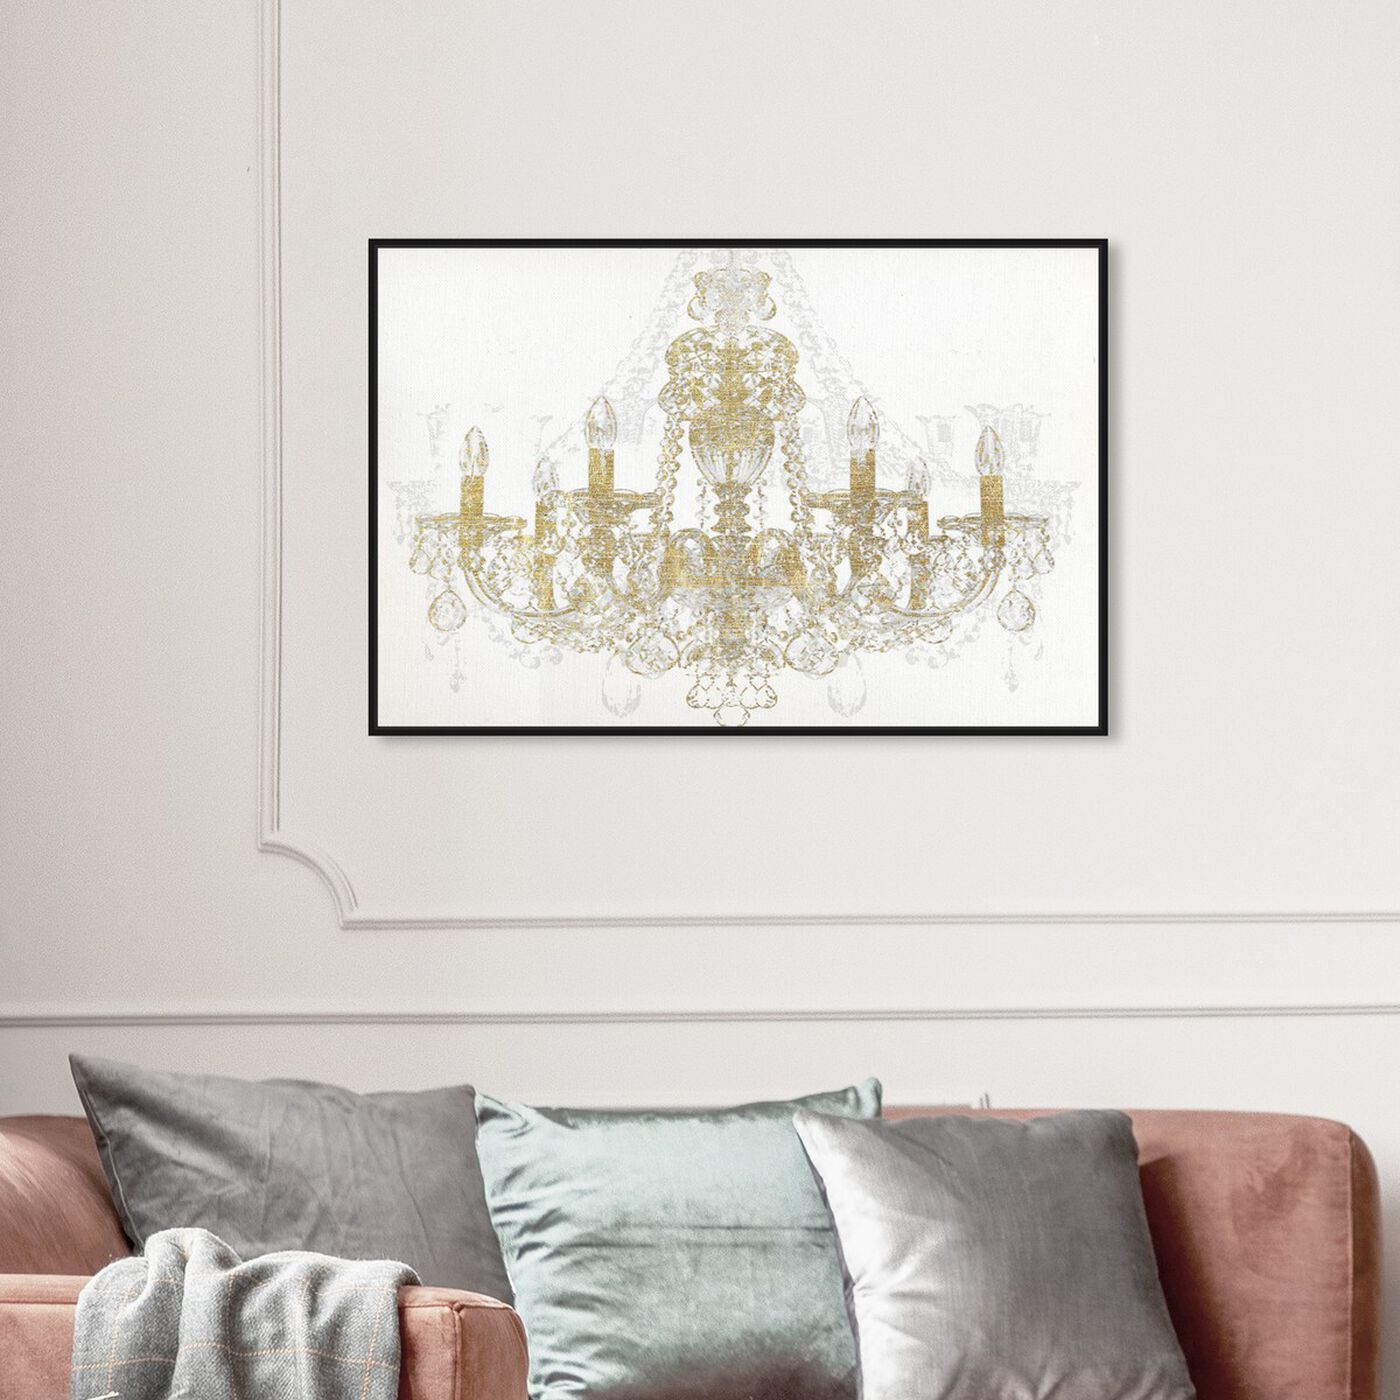 Hanging view of Chandelier Diamond featuring fashion and glam and chandeliers art.